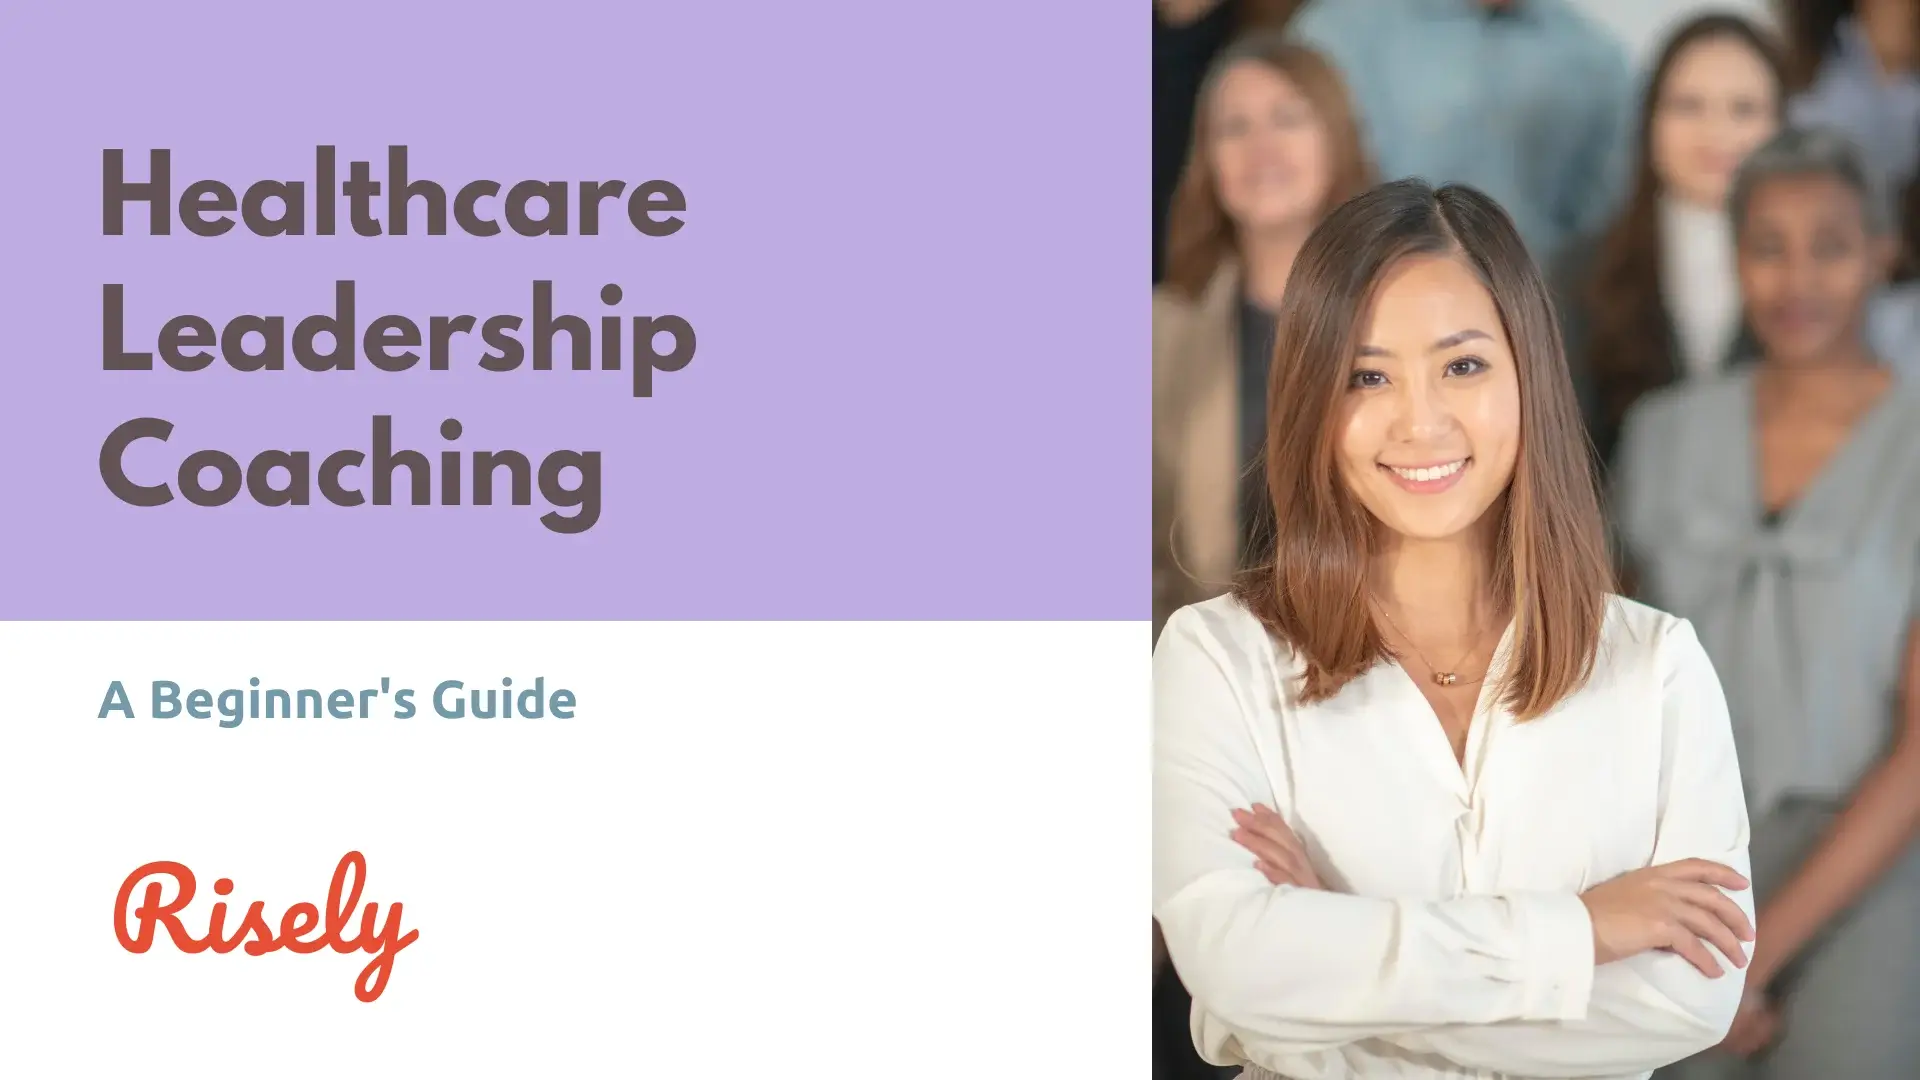 Healthcare Leadership Coaching: A Beginner’s Guide